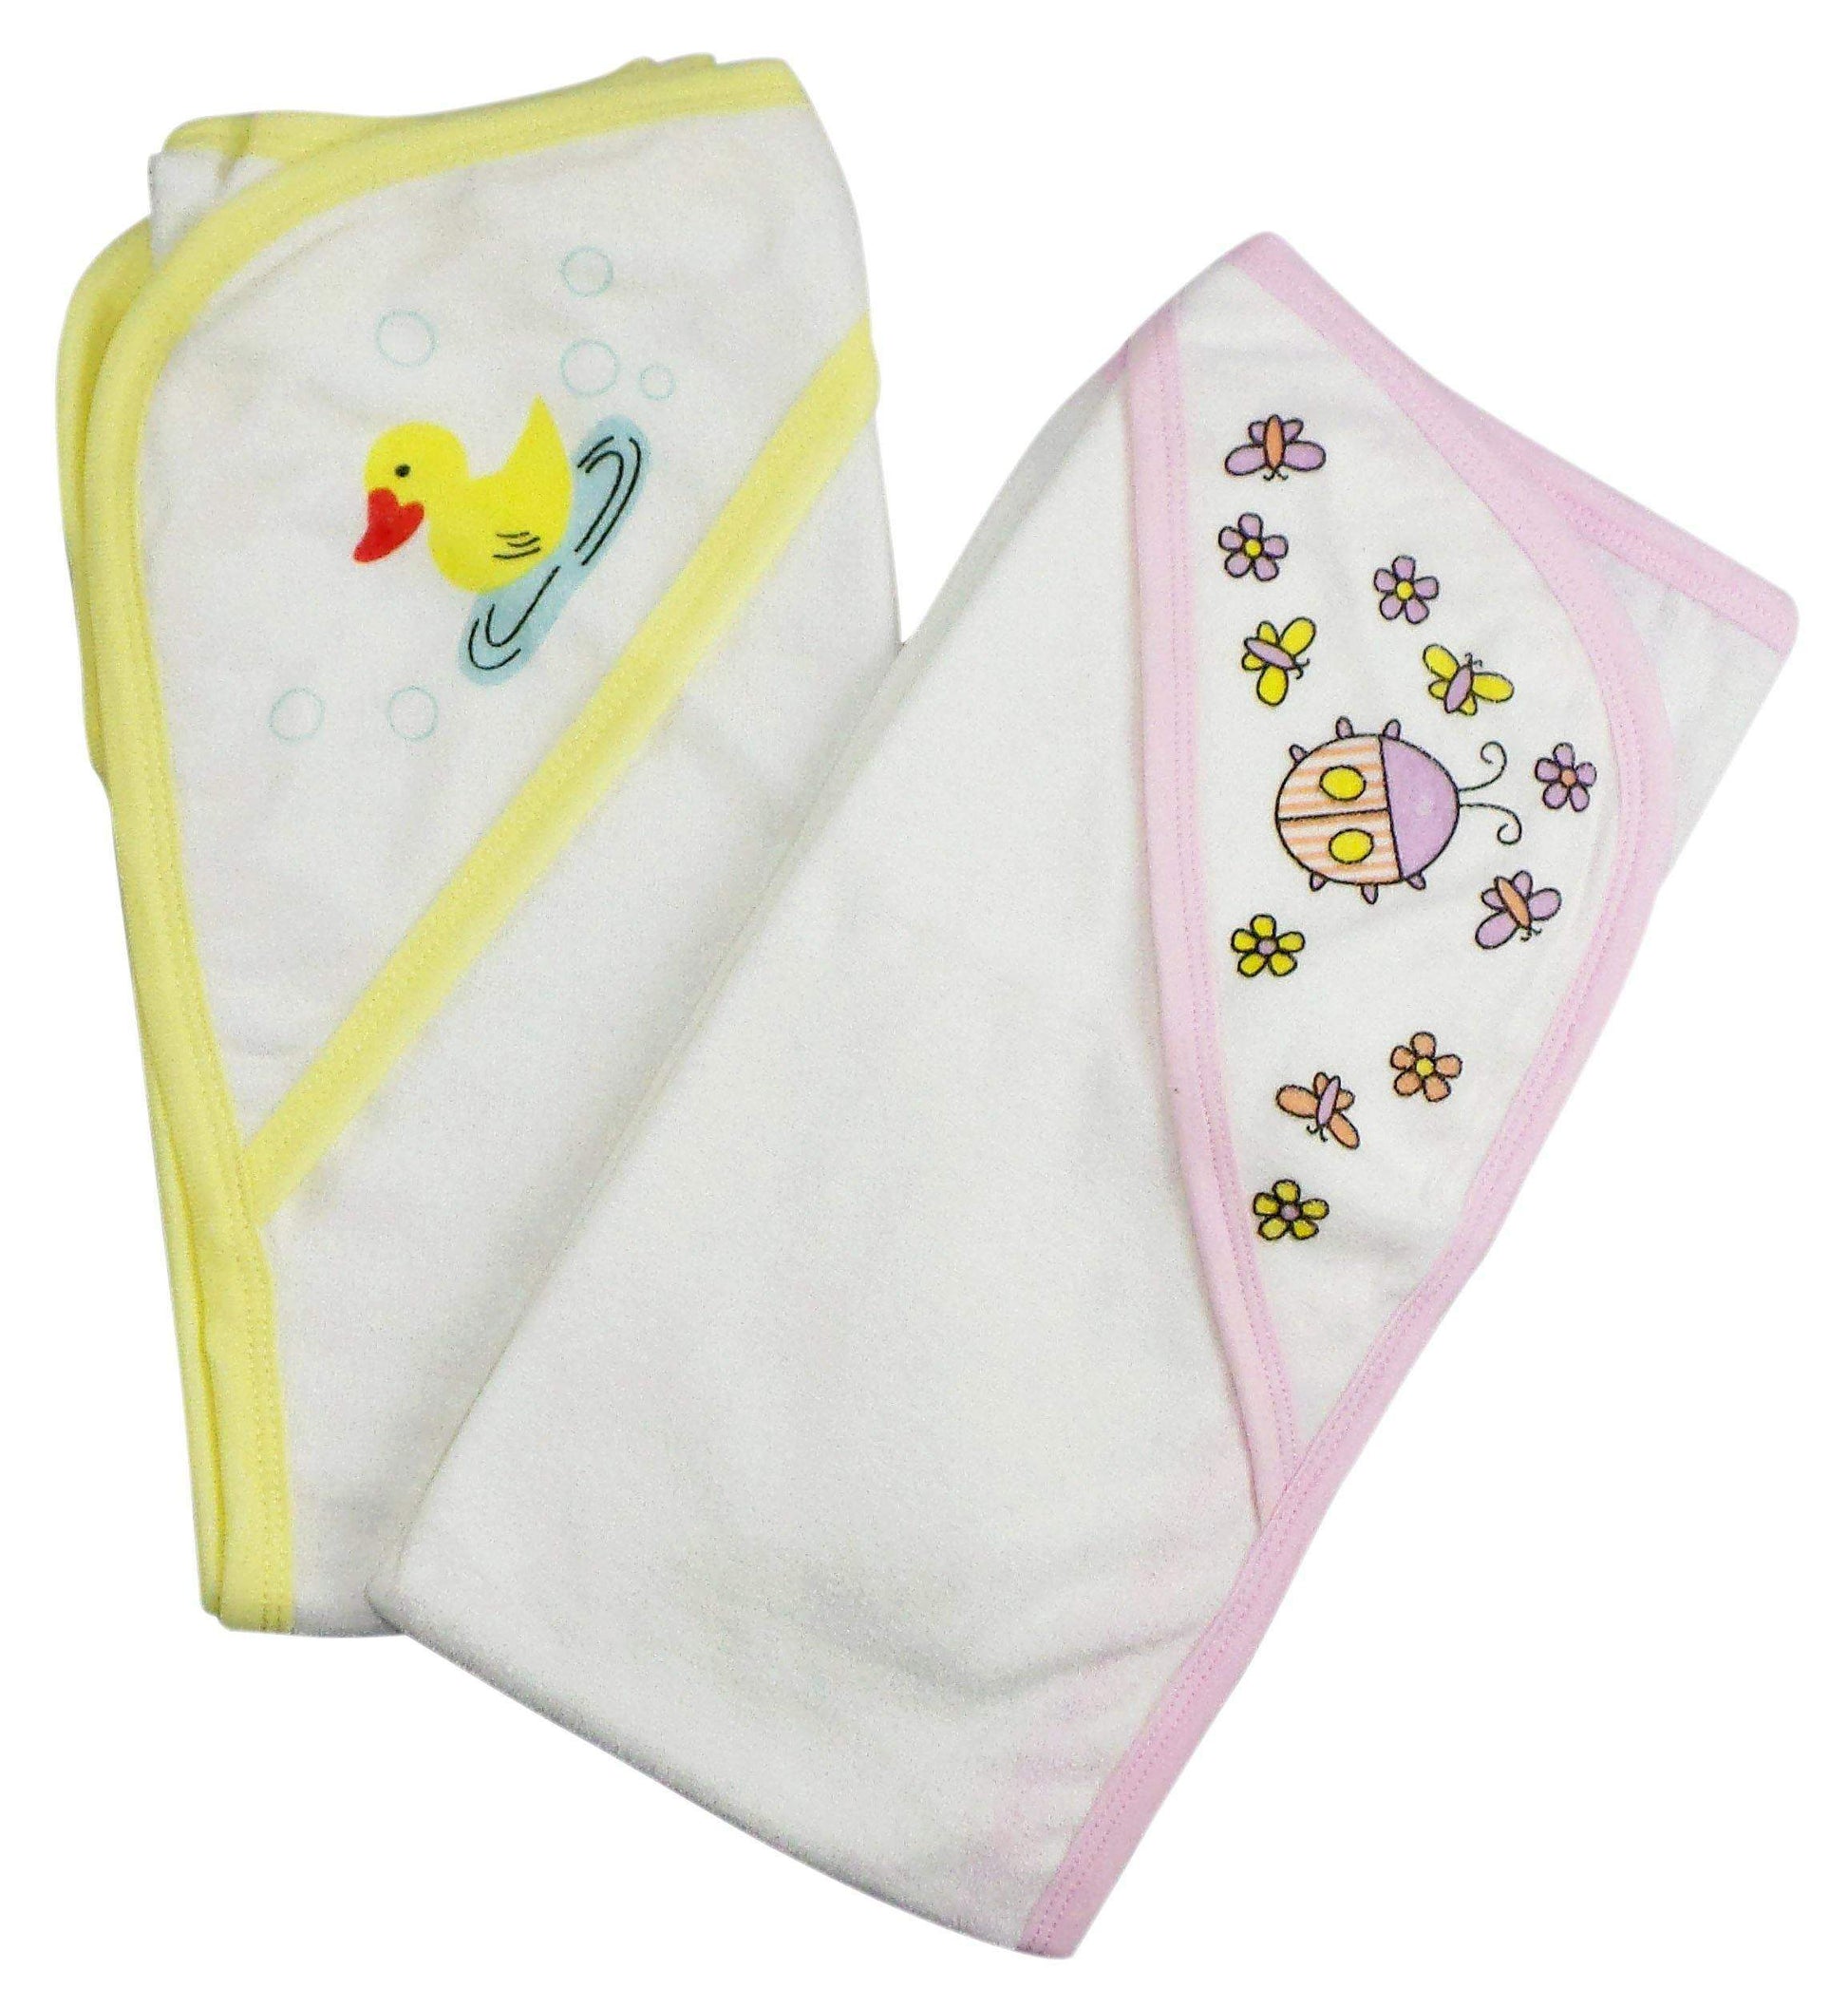 Bambini Infant Hooded Bath Towel (Pack of 2)-Bambini-Baby Clothes,Bath Robes,Towels